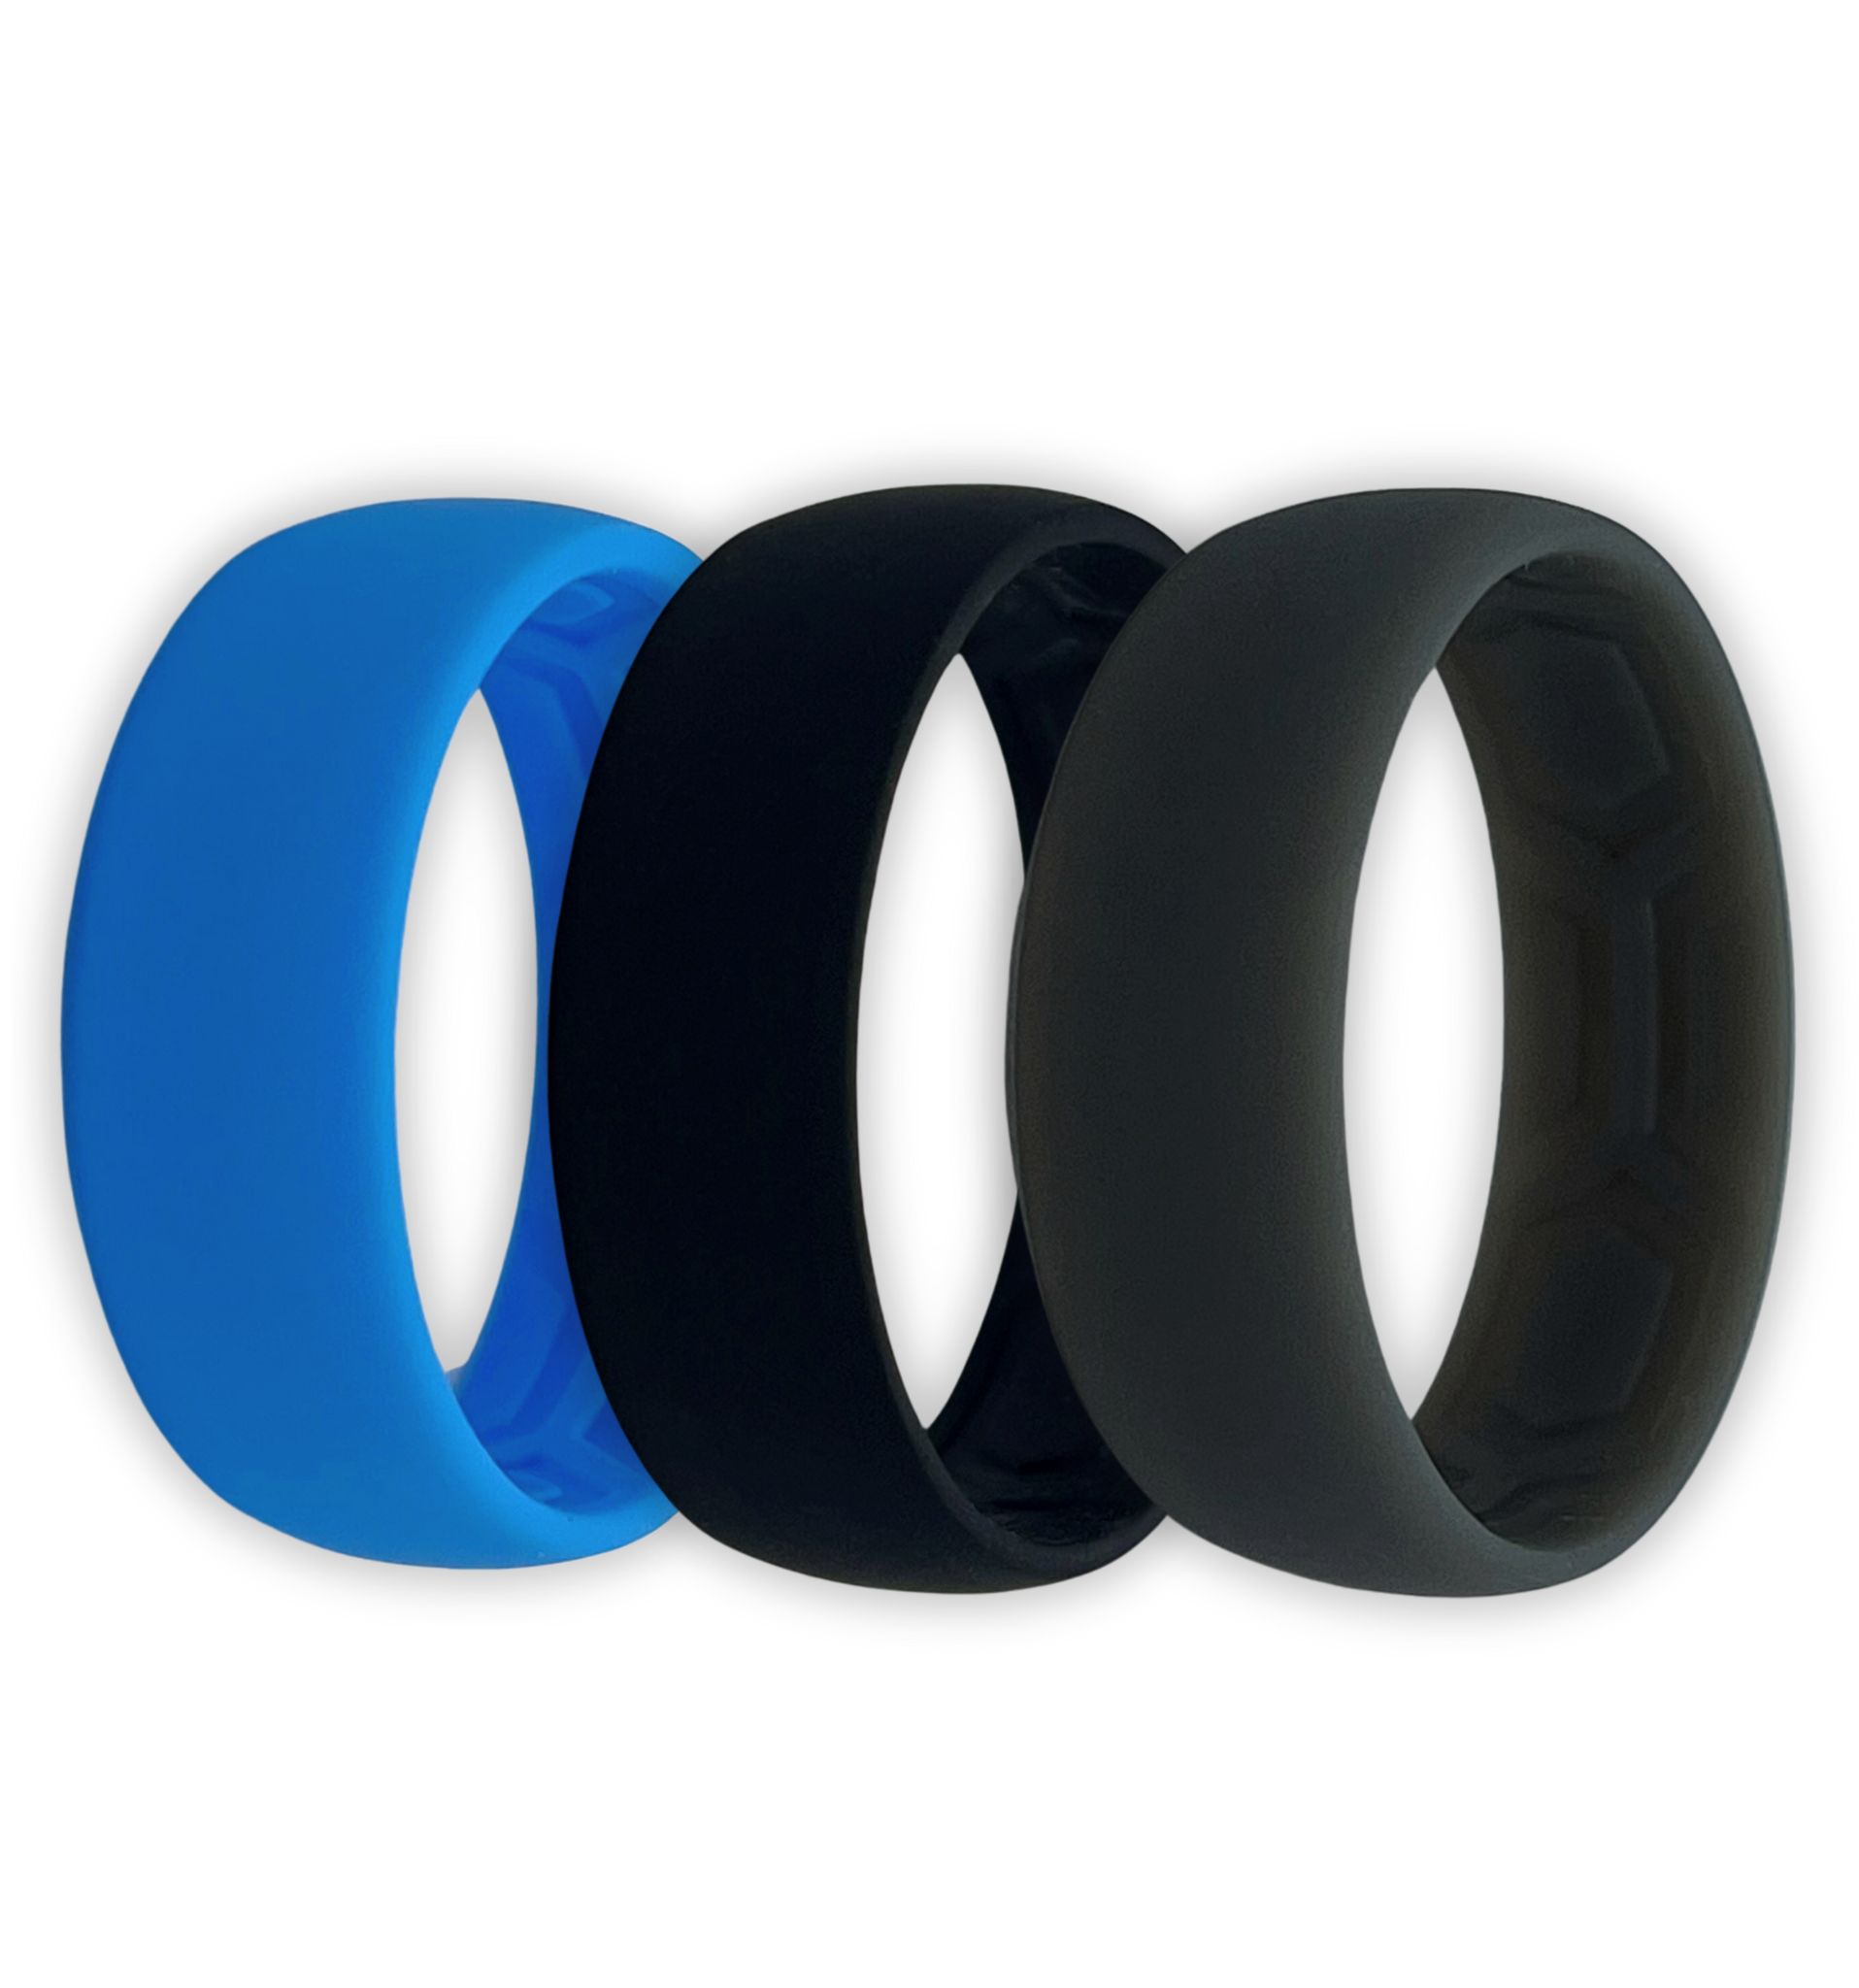 Why Do People Wear Silicone Rings?